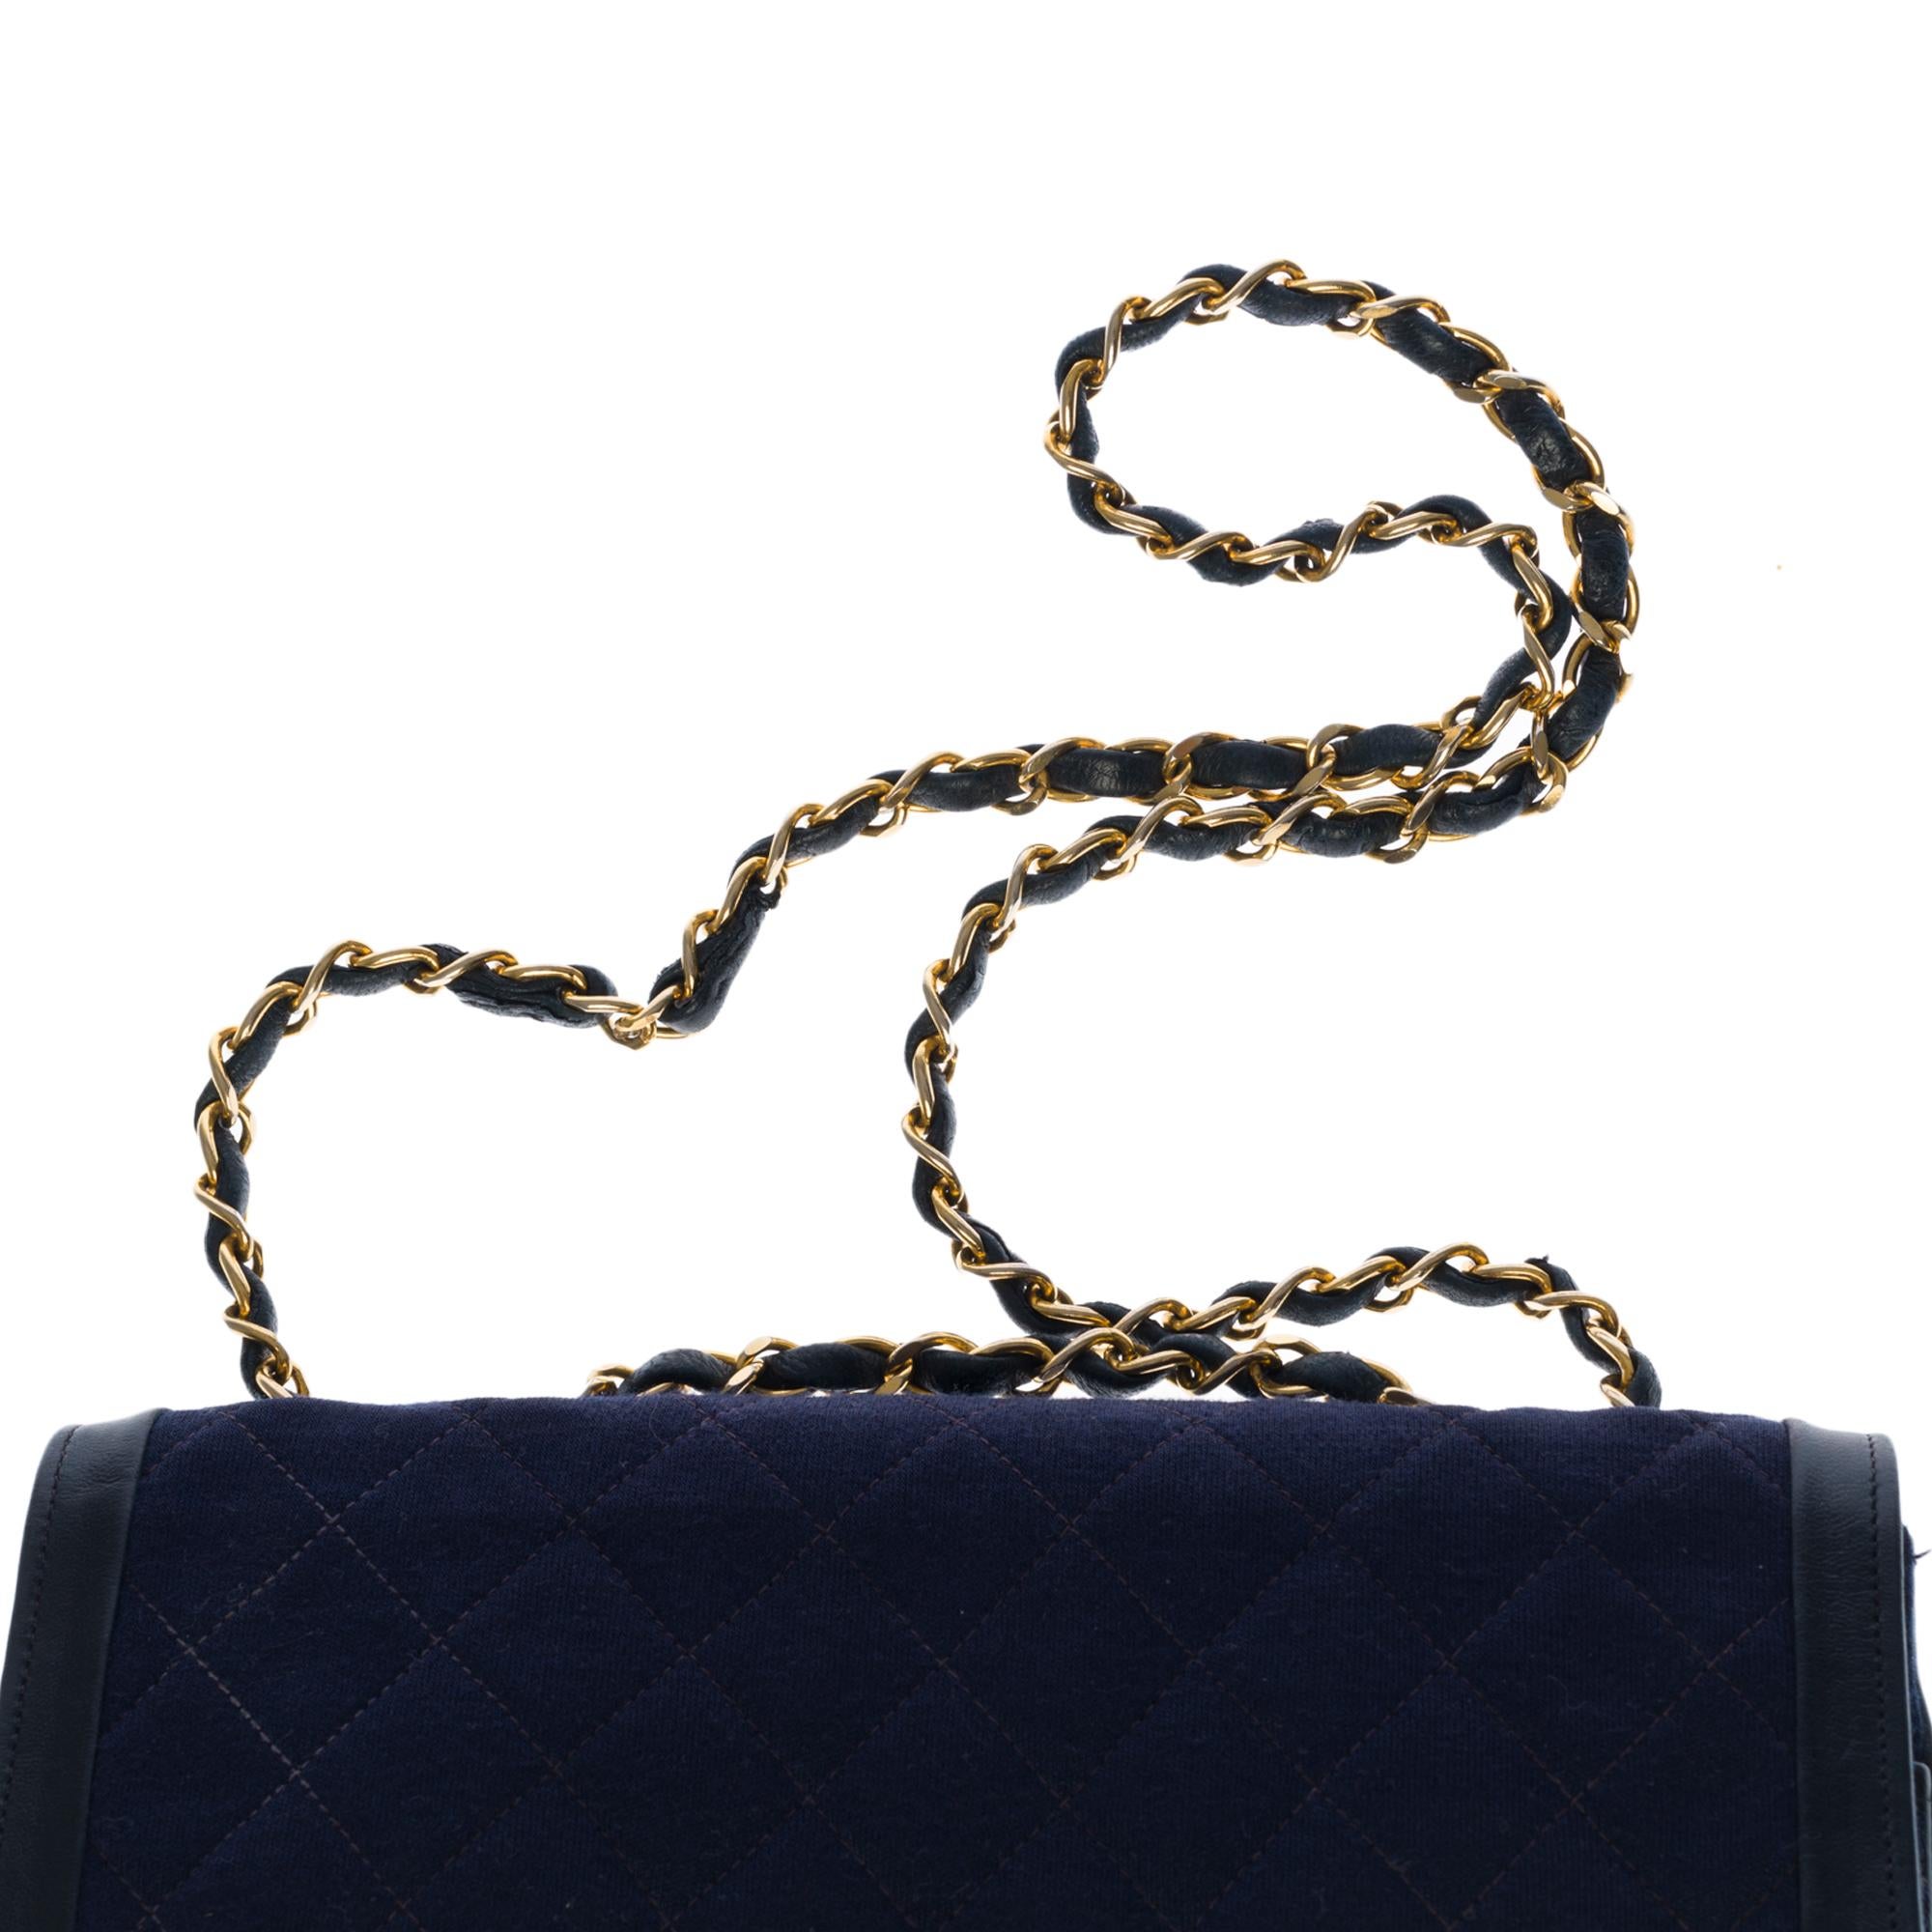 Chanel Classique two-material bag in navy blue quilted jersey and leather, GHW 1